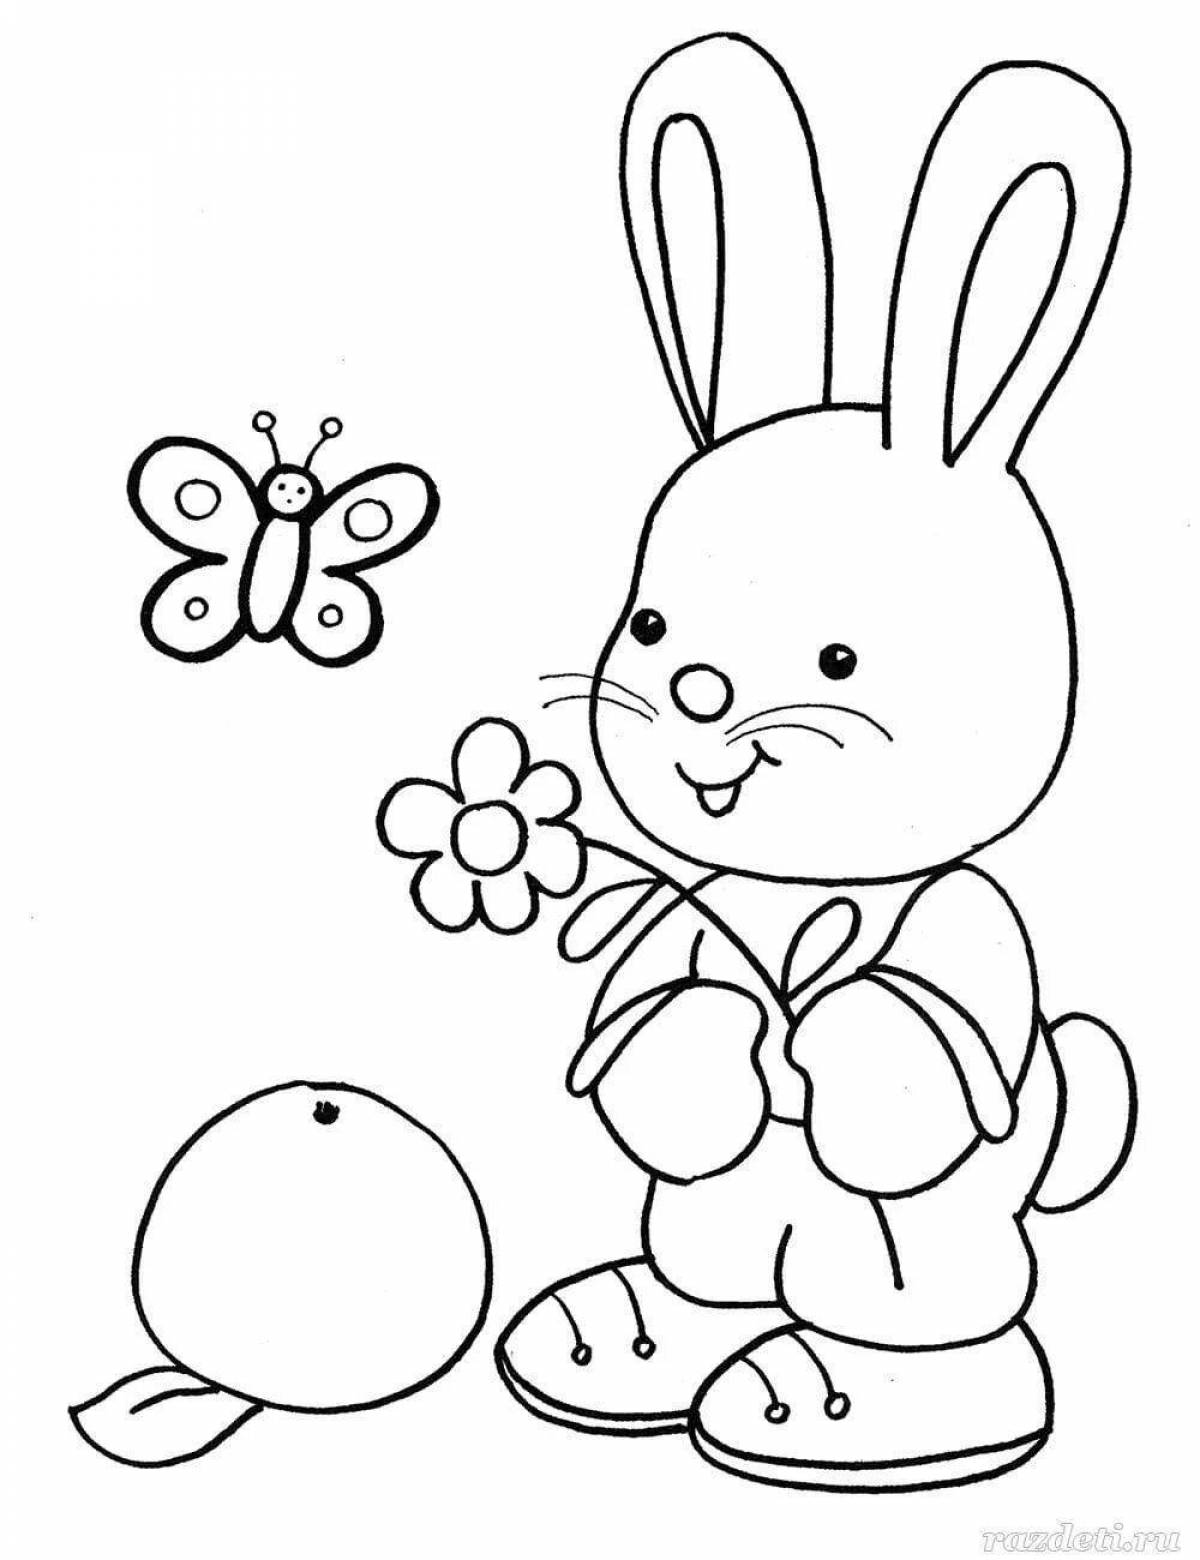 Coloring book for 5 year olds in kindergarten